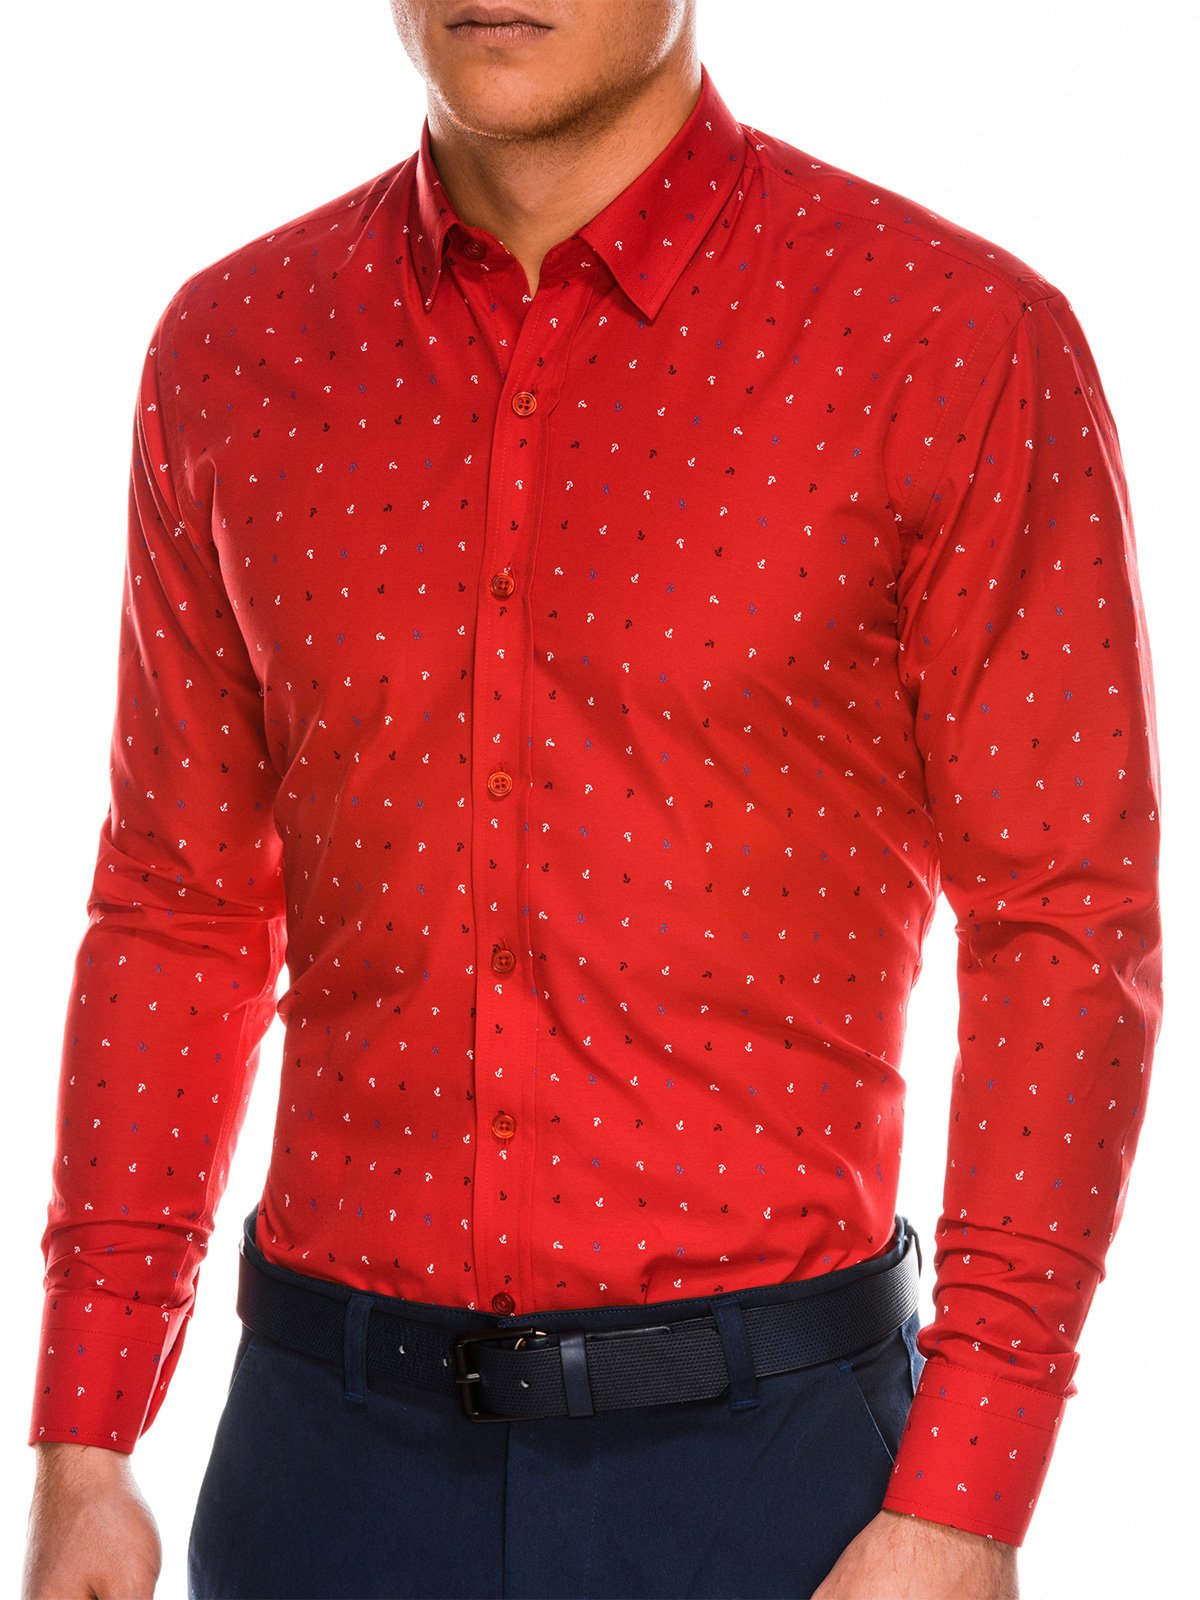 red button up shirt mens long sleeve